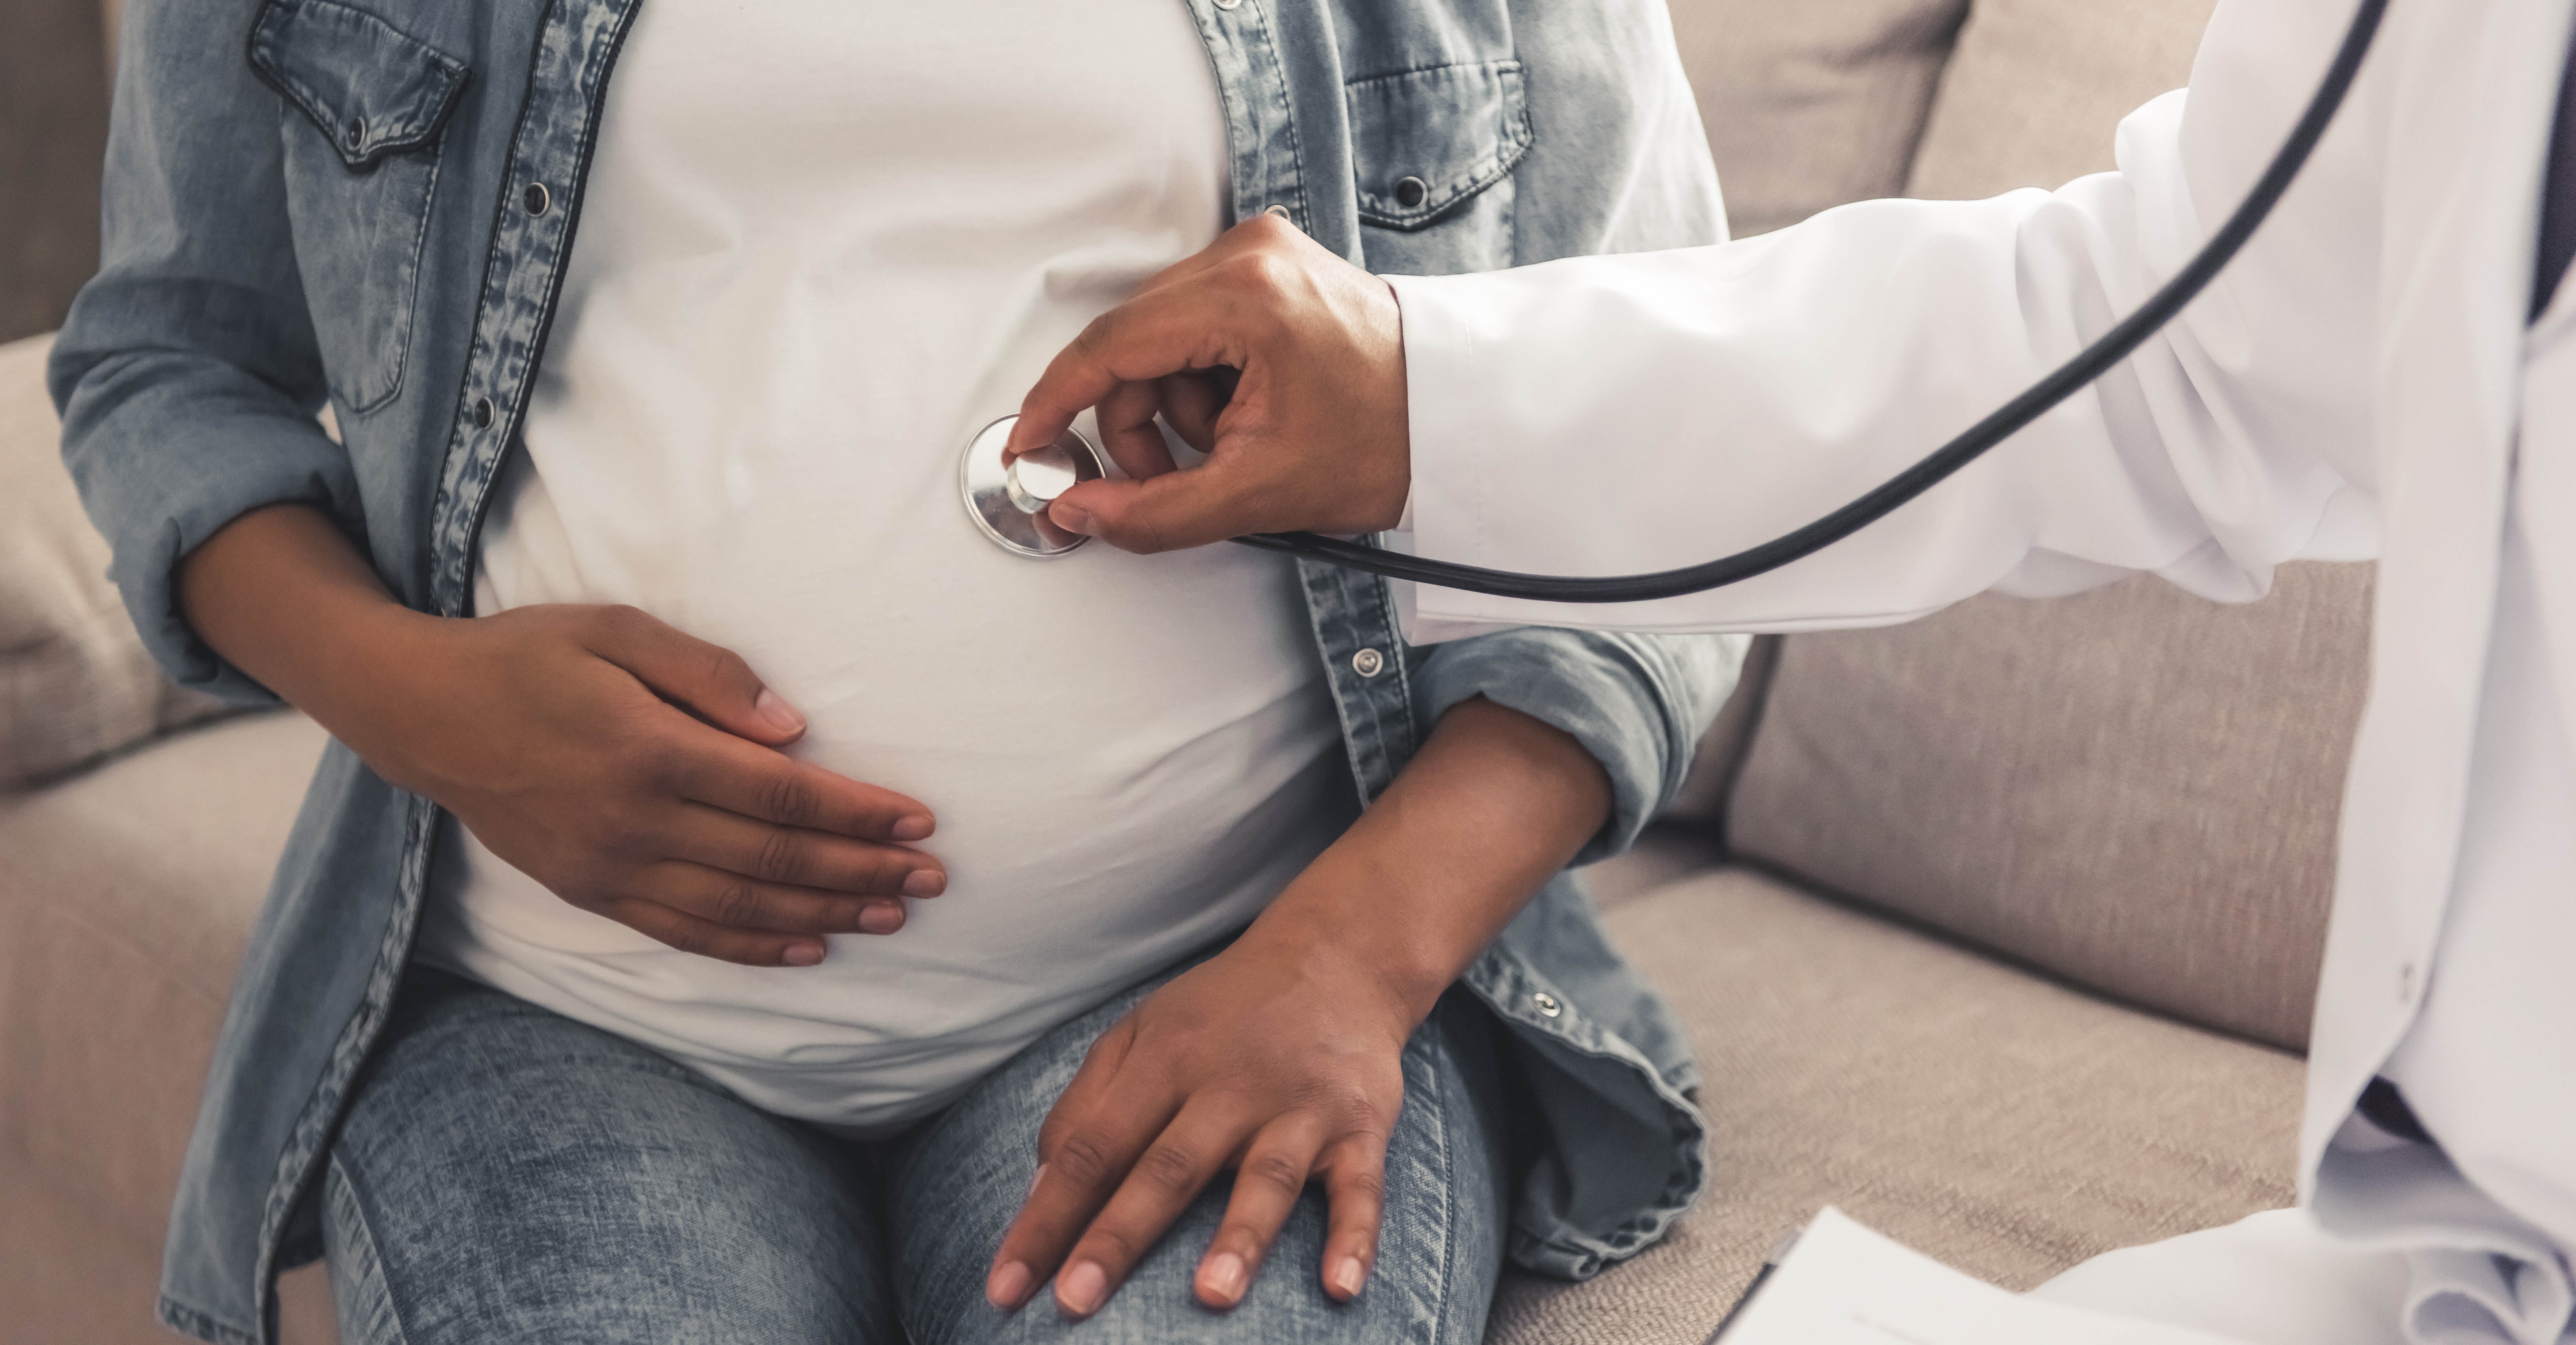 Exposure to chemicals increased in pregnant women in the last decade, study suggests